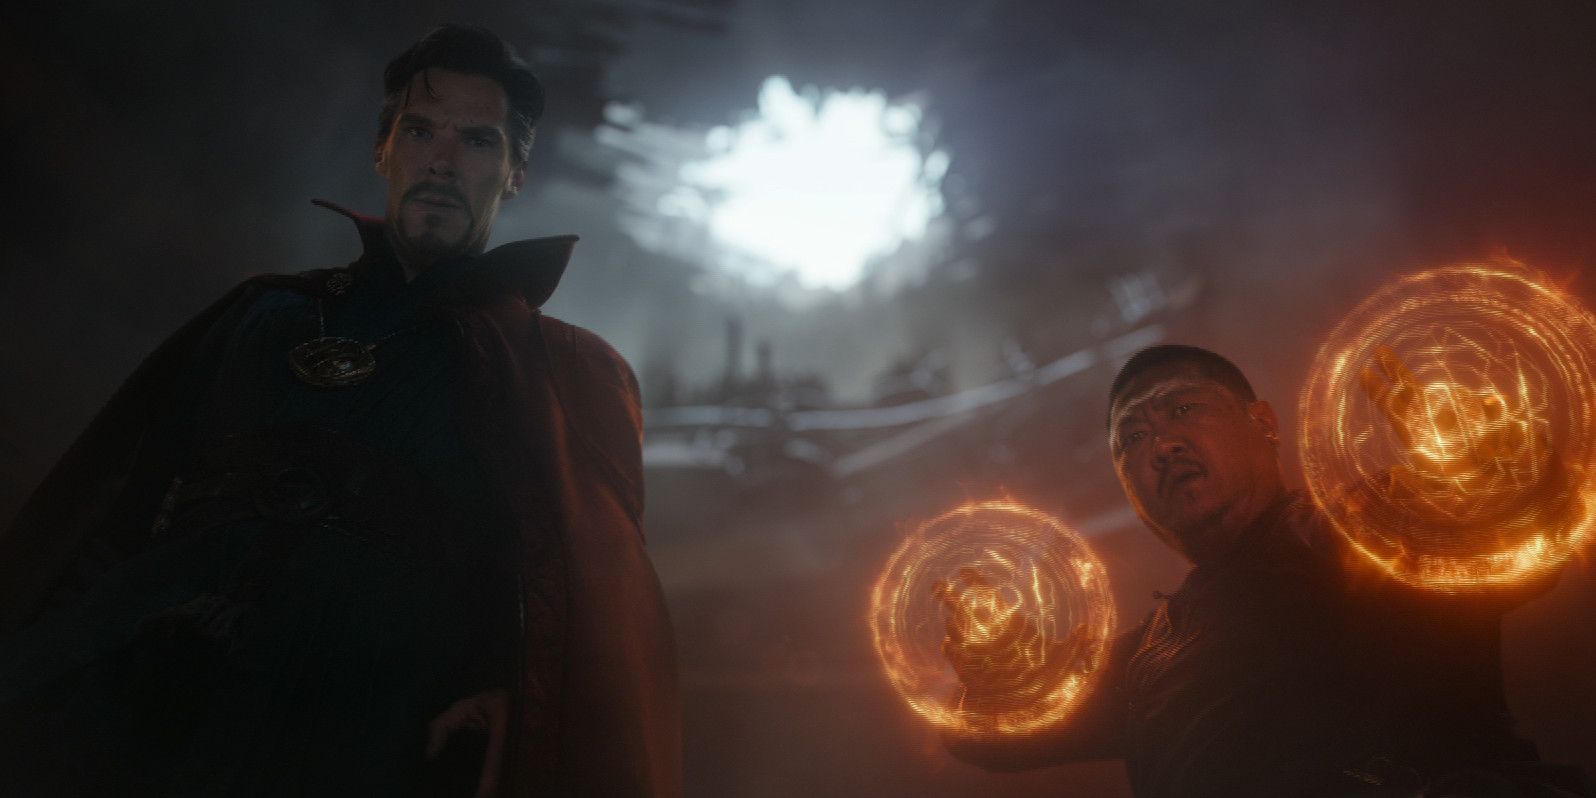 Doctor Strange 2: Every Update You Need To Know